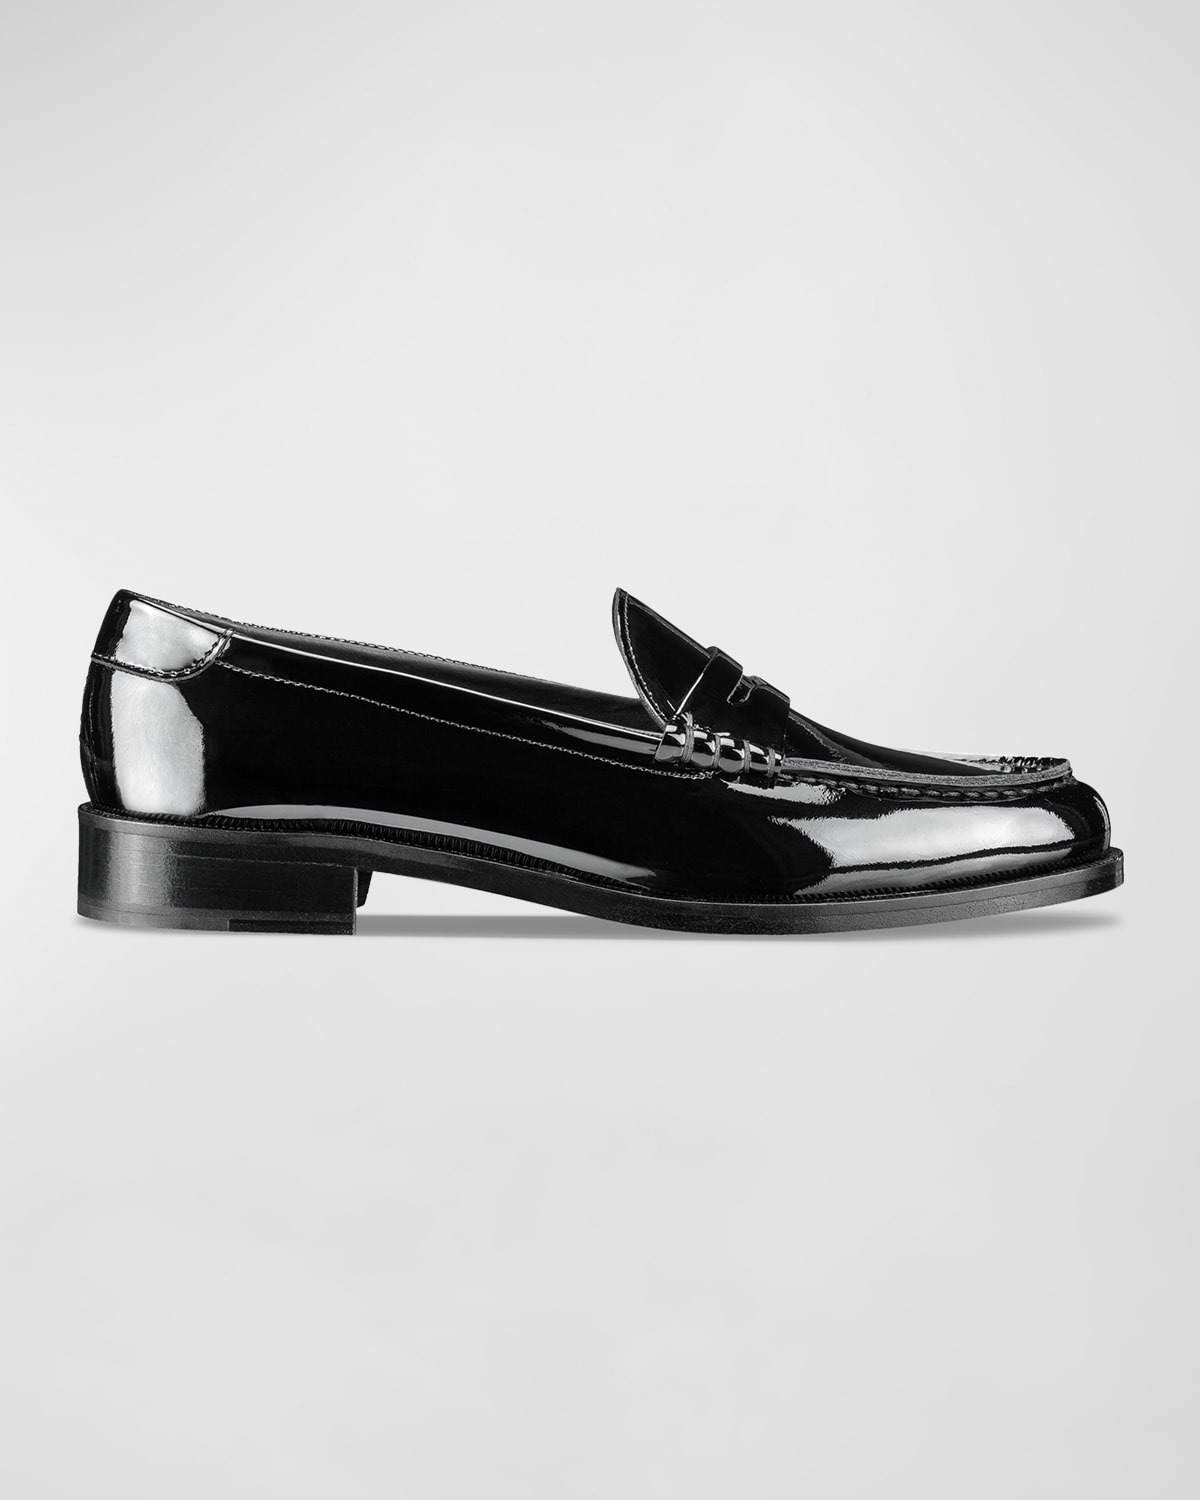 Koio Brera Leather Penny Loafers | Neiman Marcus